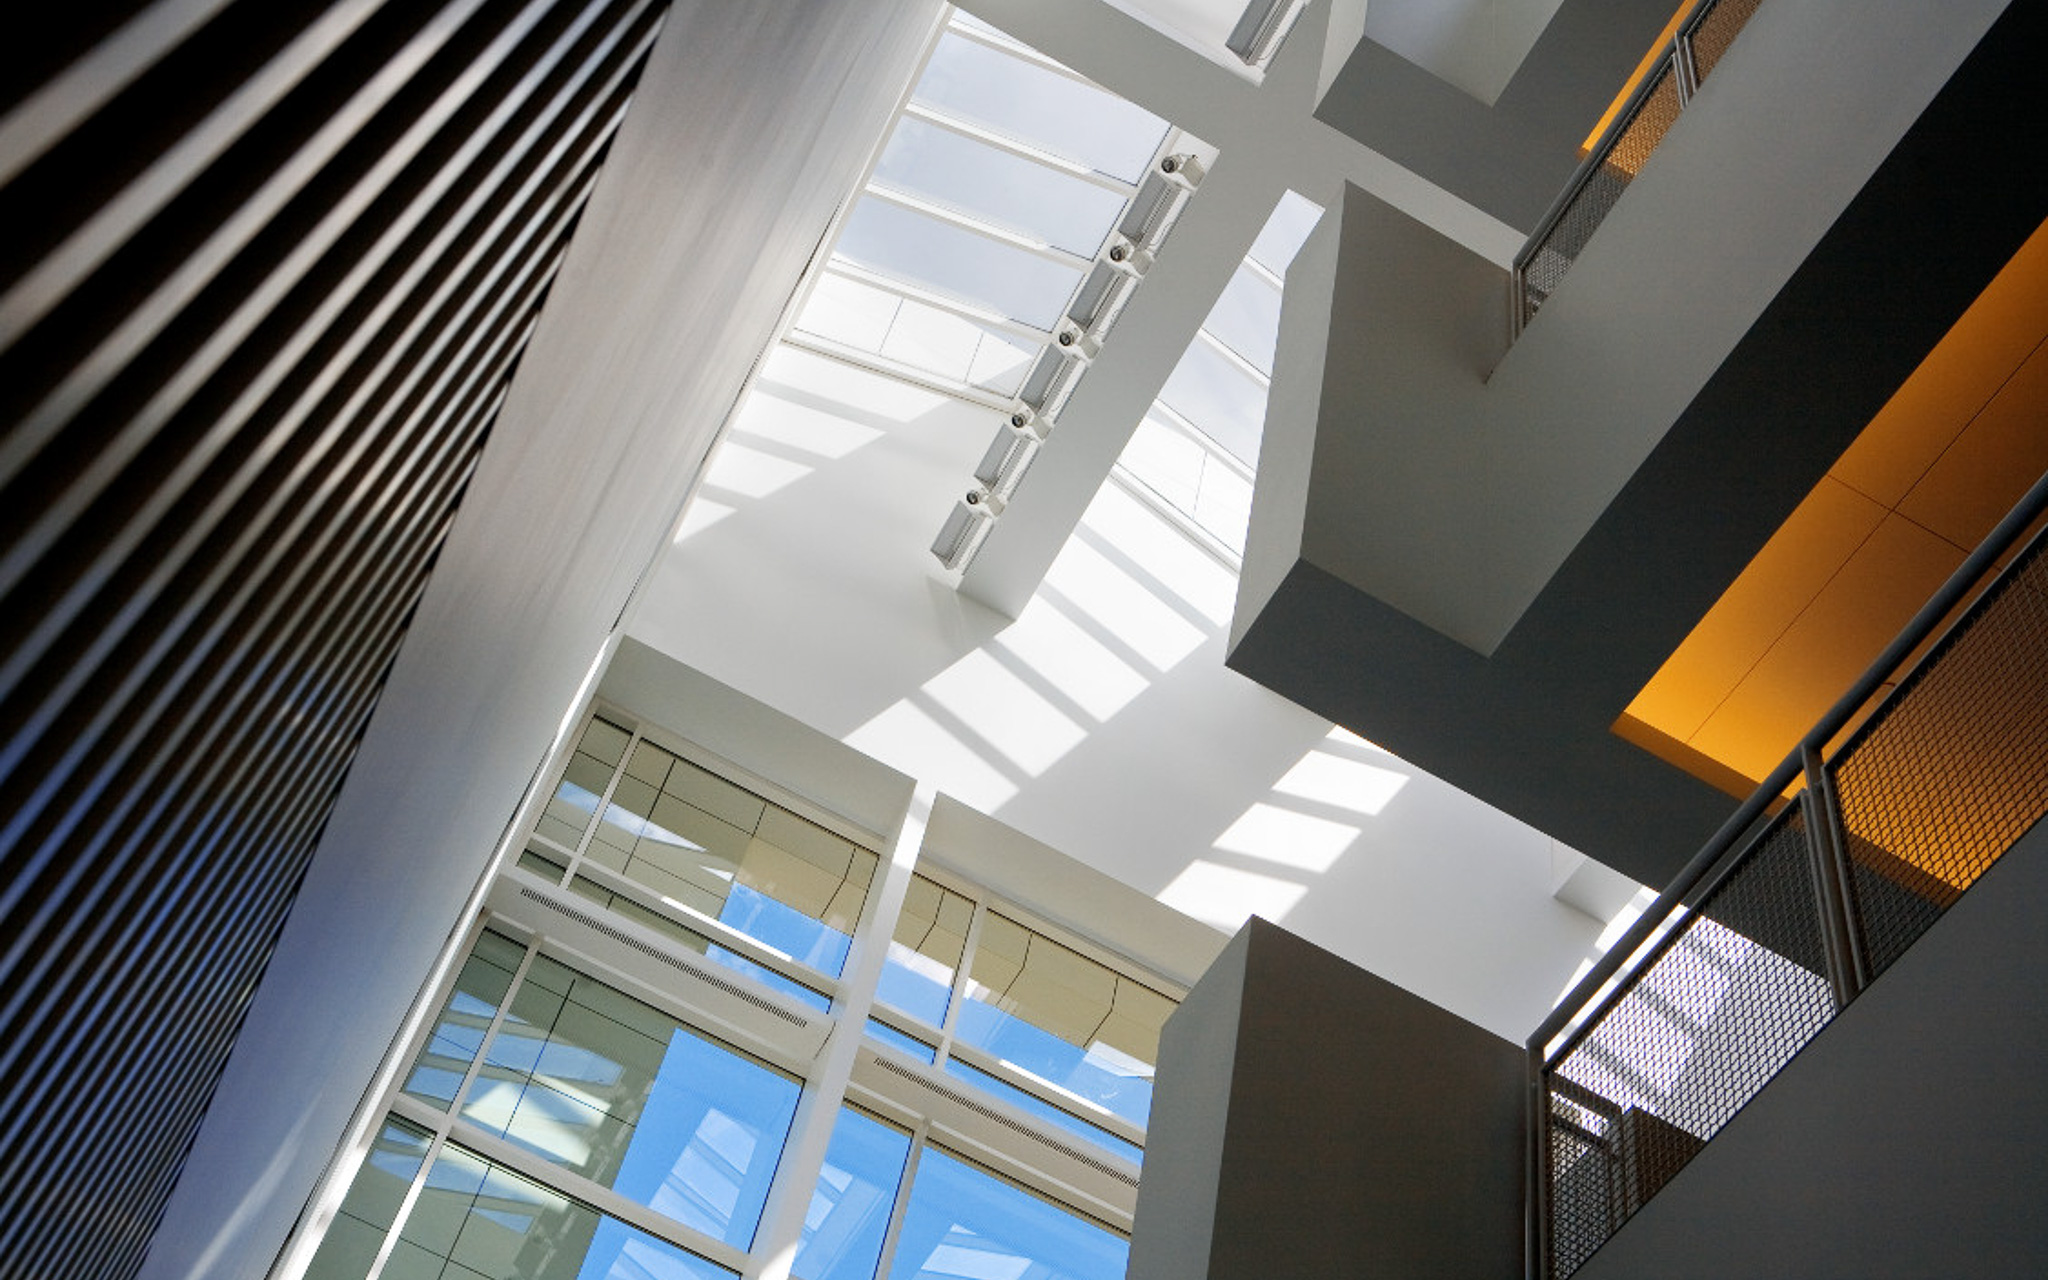 Interior architectural design of Weill Hall using natural lighting and brutalist structures